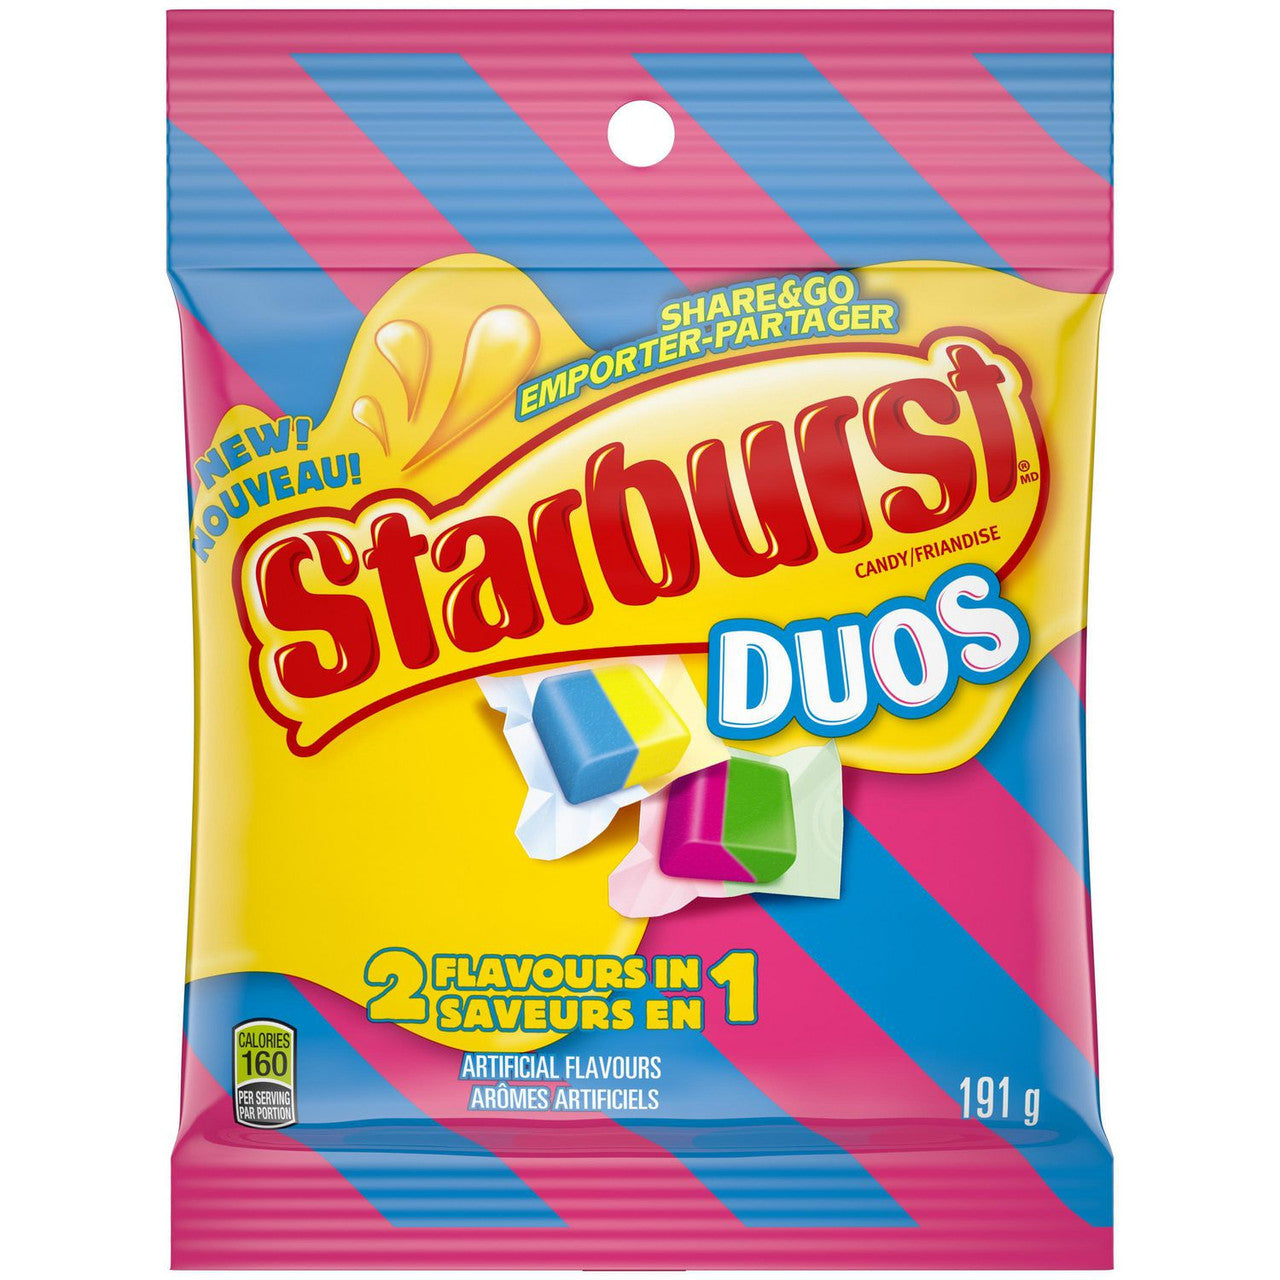 Starburst Duos 2 Flavours in 1, Gummy Candy, 191g/6.7 oz., {Imported from Canada}